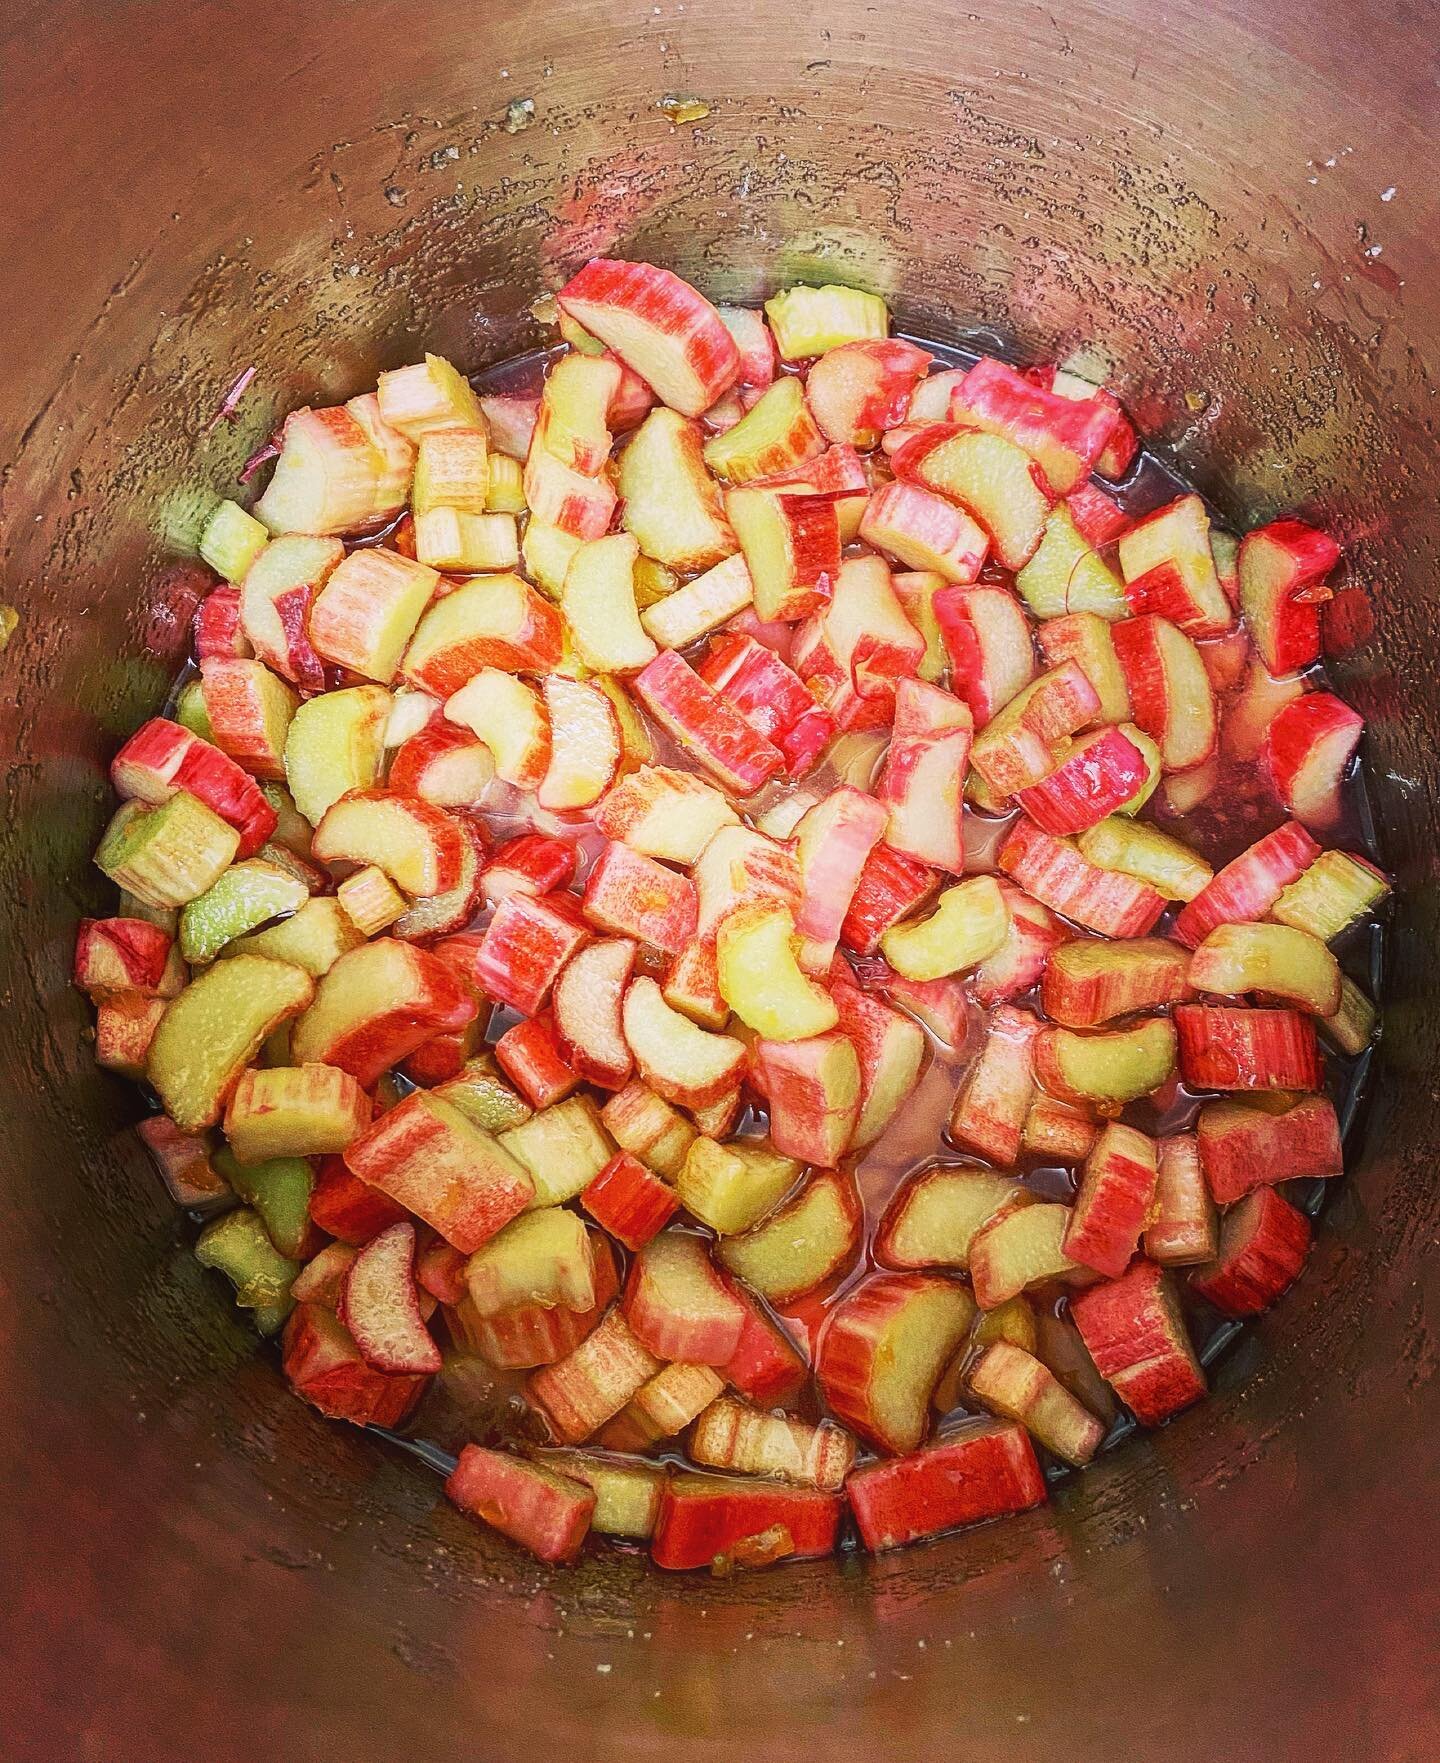 Rhubarb pickle, chutney and compote coming soon&hellip;.smelling delicious.

#rhubarb #preservologist #compote #chutney #pickle #preserving #potshot #foodprep #seasonalfood #ohsmygoodness